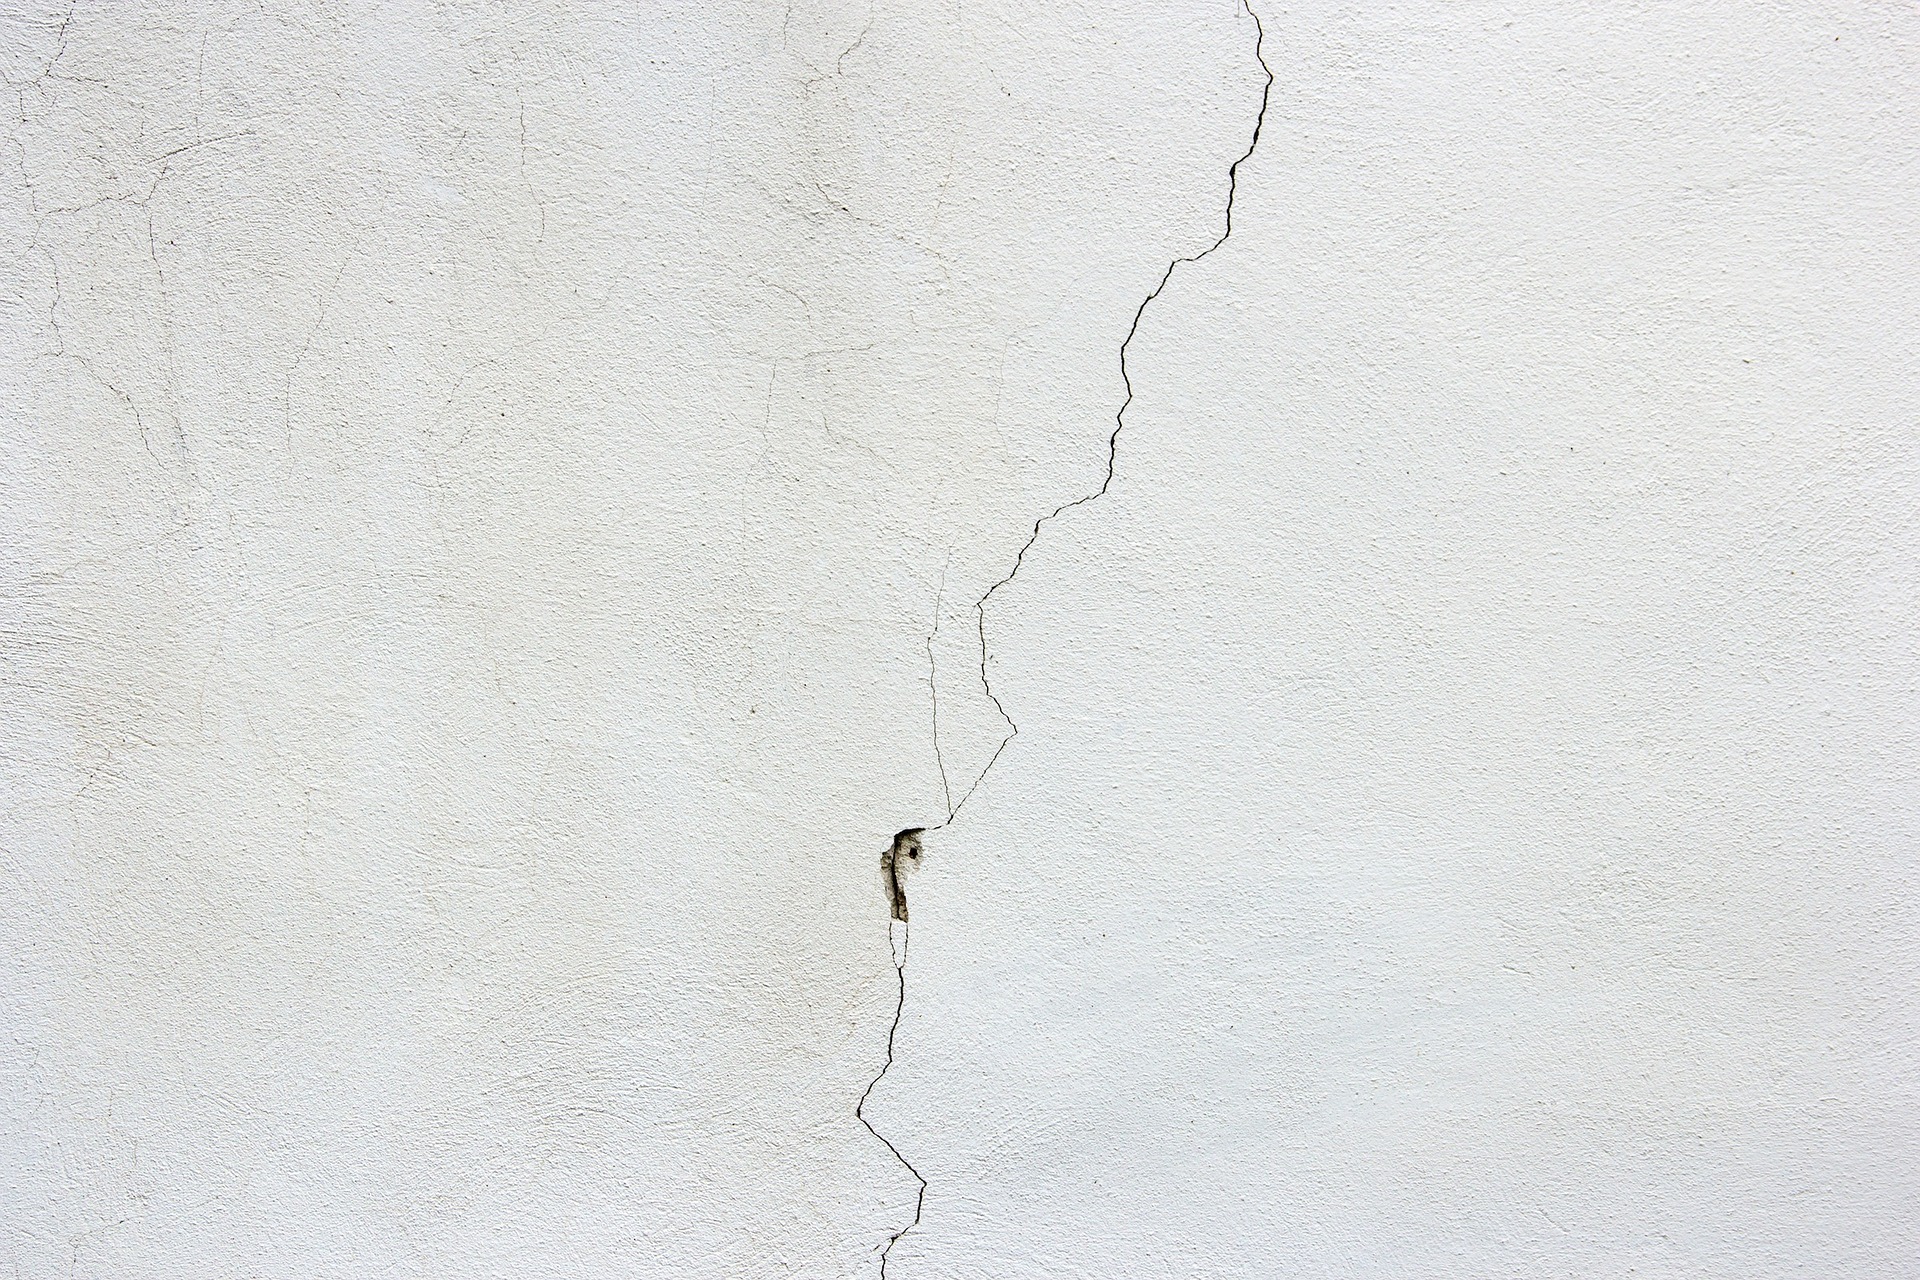 Four signs of foundation damage in a white wall with a crack.

Keywords: Foundation Repair, Signs